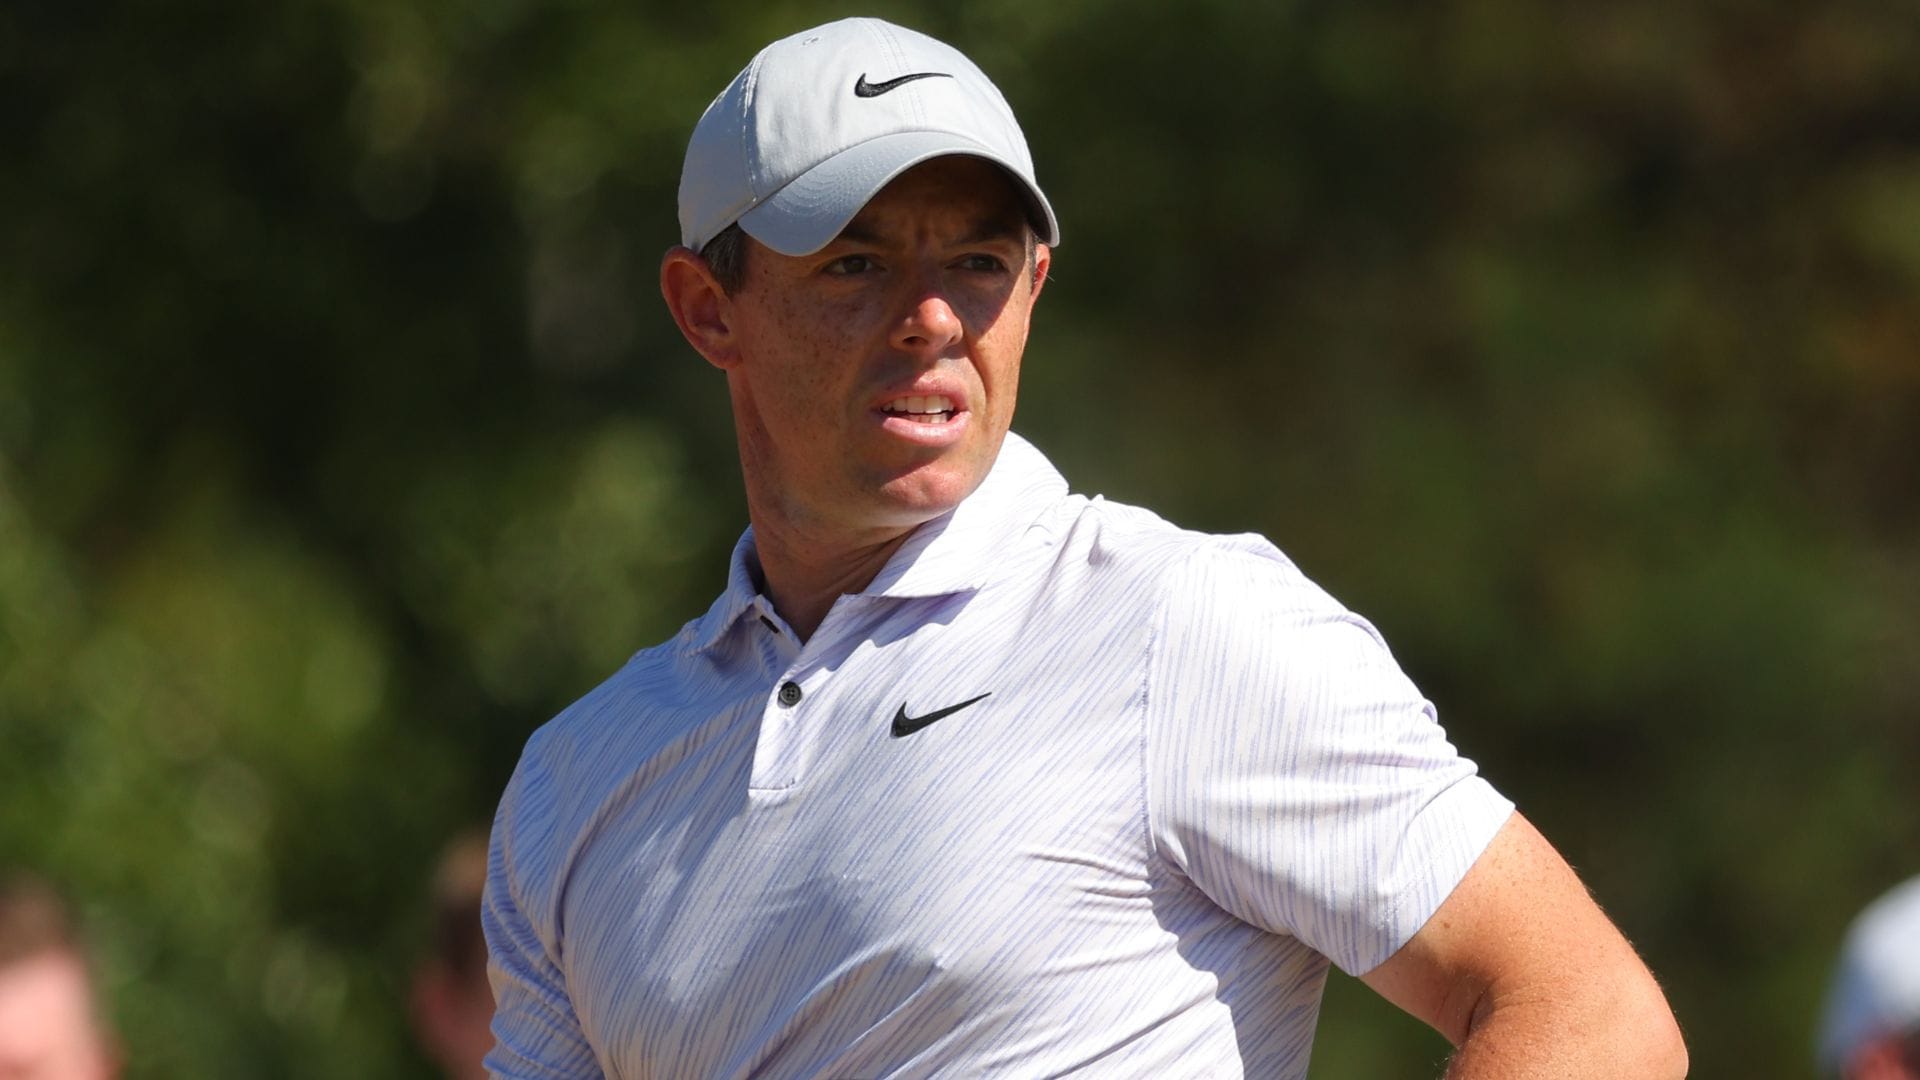 Rory McIlroy Calls For Greg Norman to Step Down as LIV Golf Commissioner